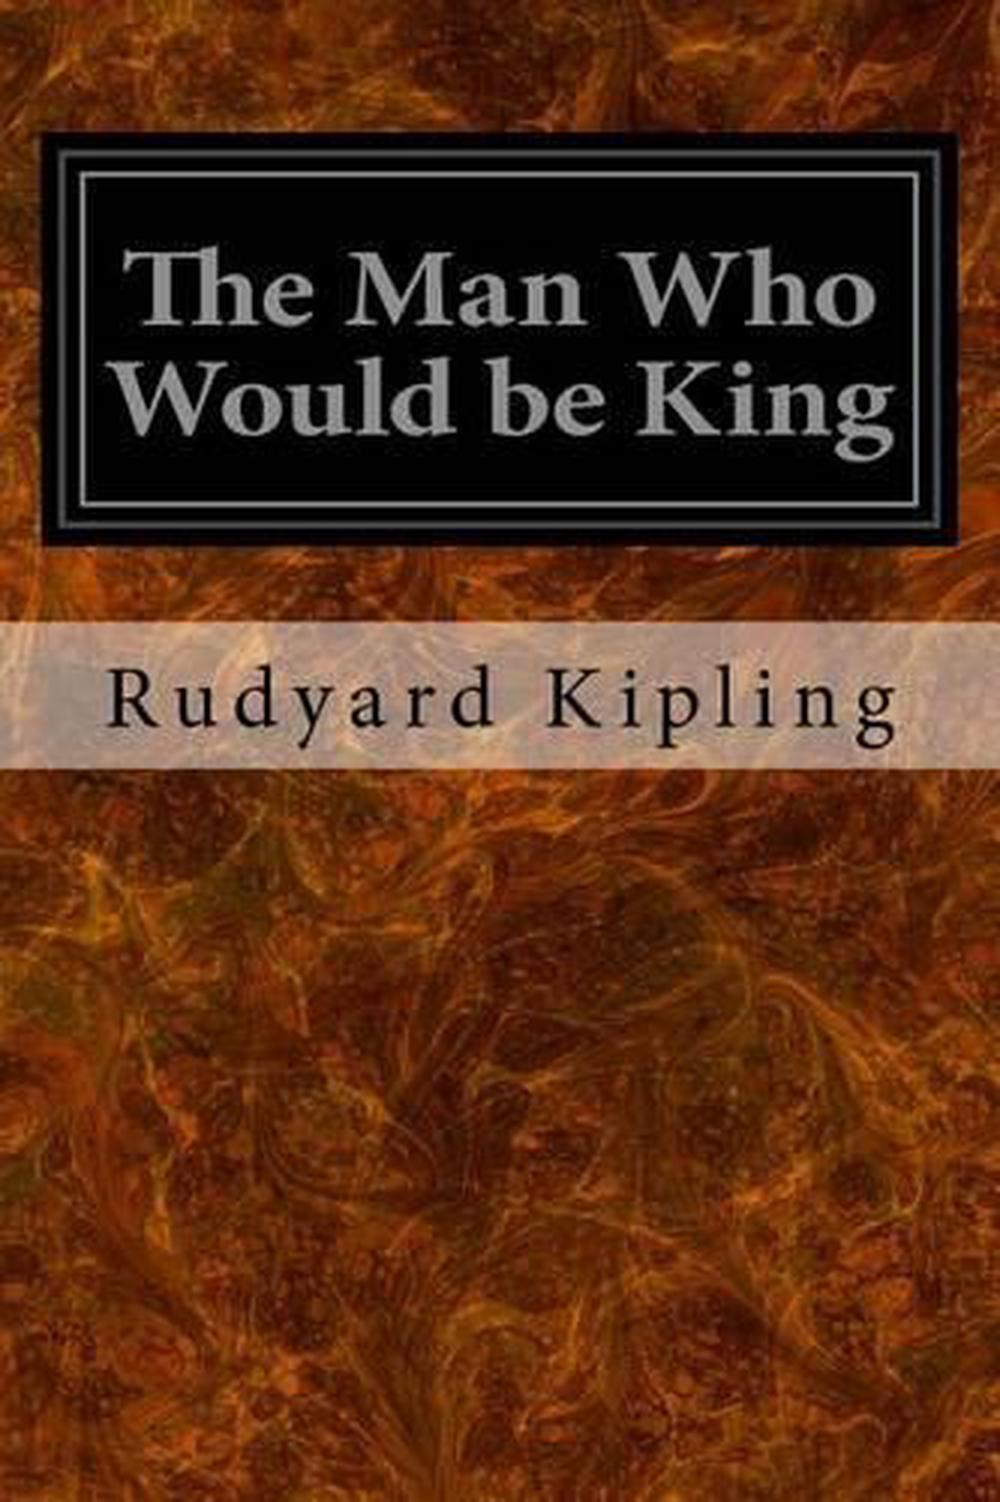 The Man Who Would Be King by Rudyard Kipling (English) Paperback Book ...